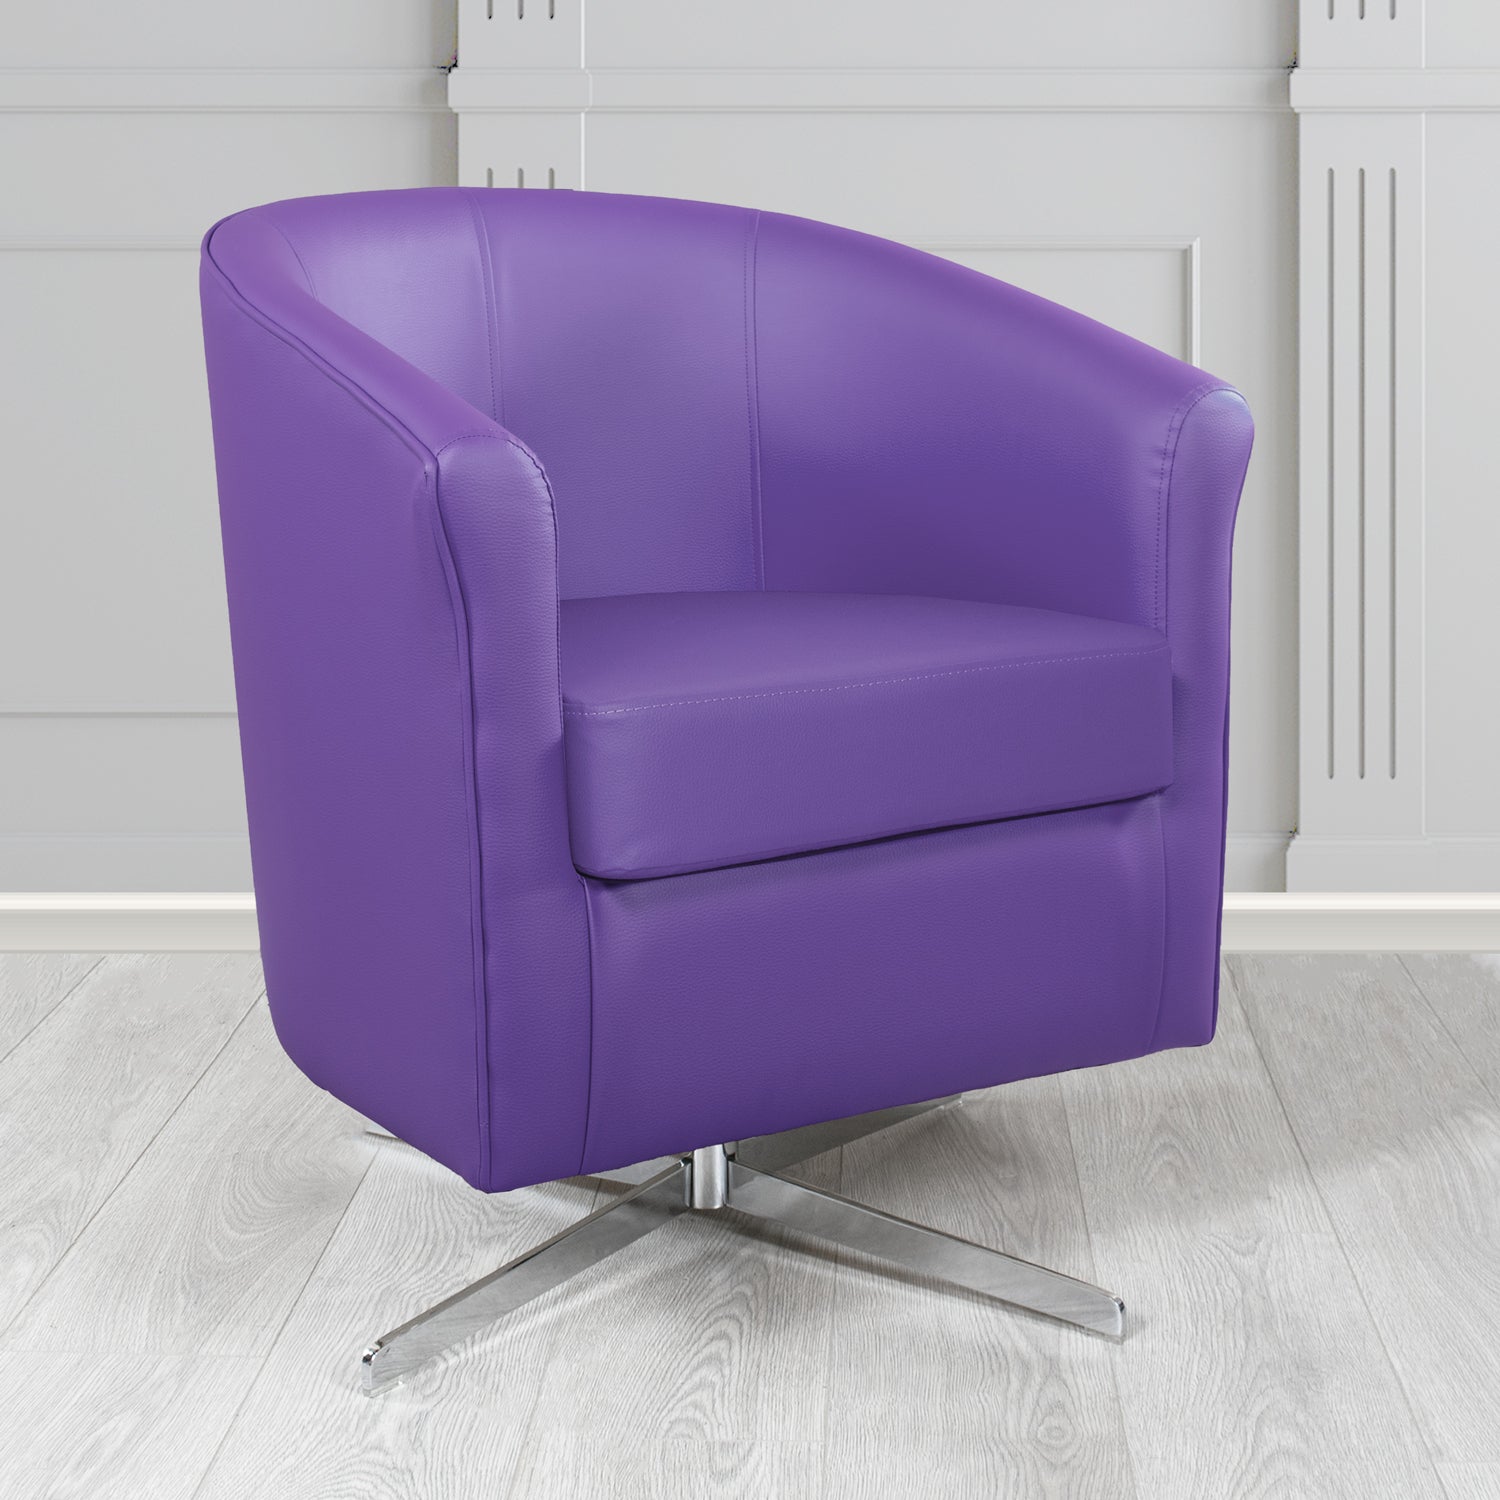 Cannes Swivel Tub Chair in Just Colour Ultraviolet Crib 5 Faux Leather - The Tub Chair Shop